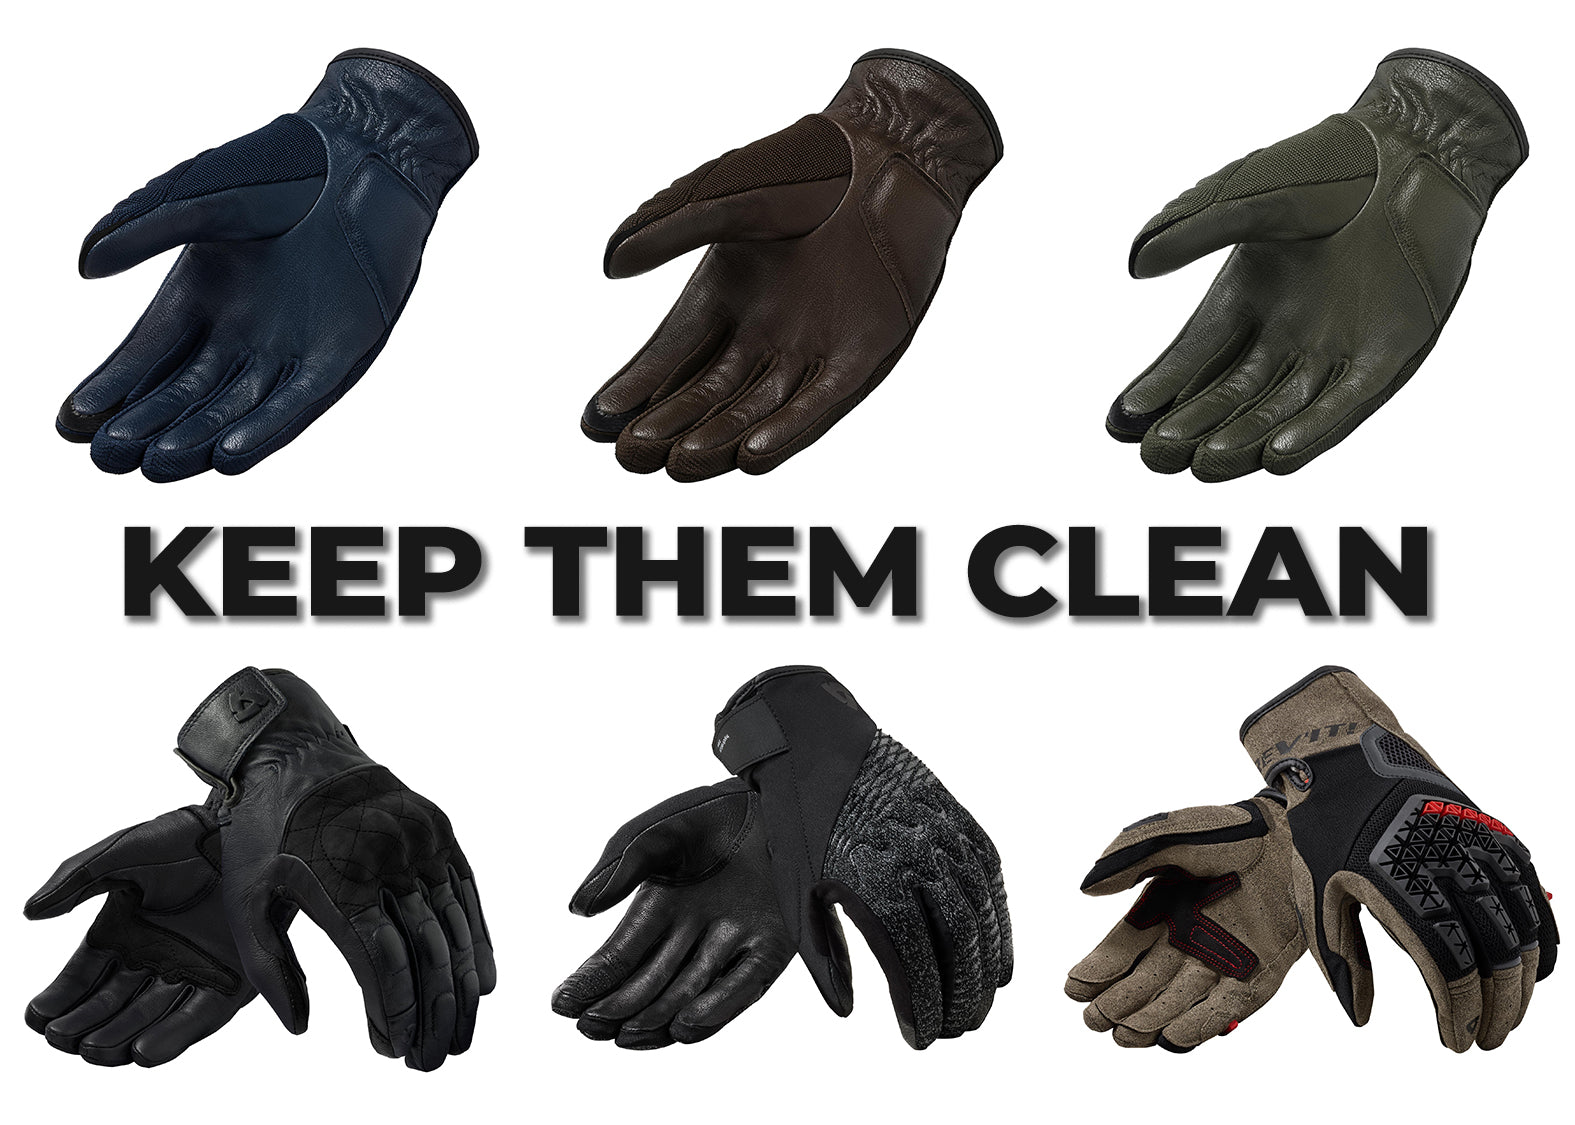 Selecting the Right Motorcycle Riding Gloves and Keeping Them Clean